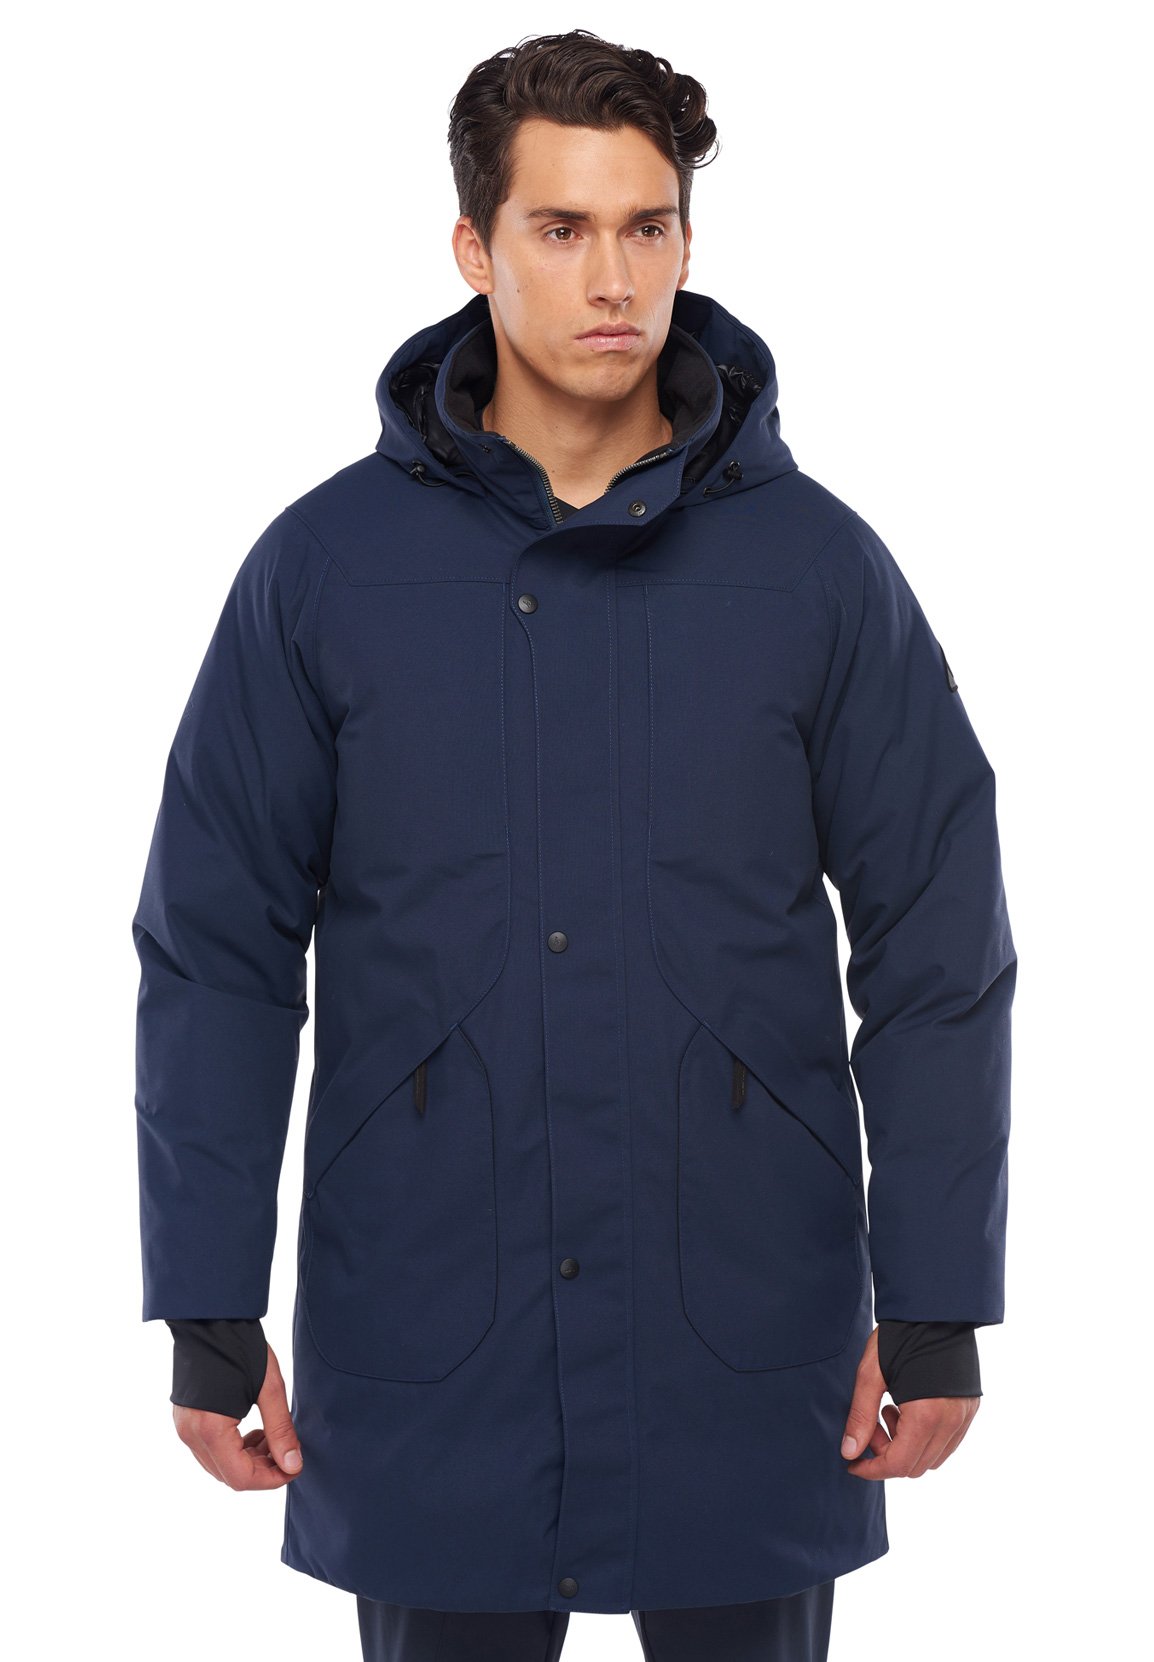 WESTCOMB | MONT PARKA 100% Made in Canada – Westcomb